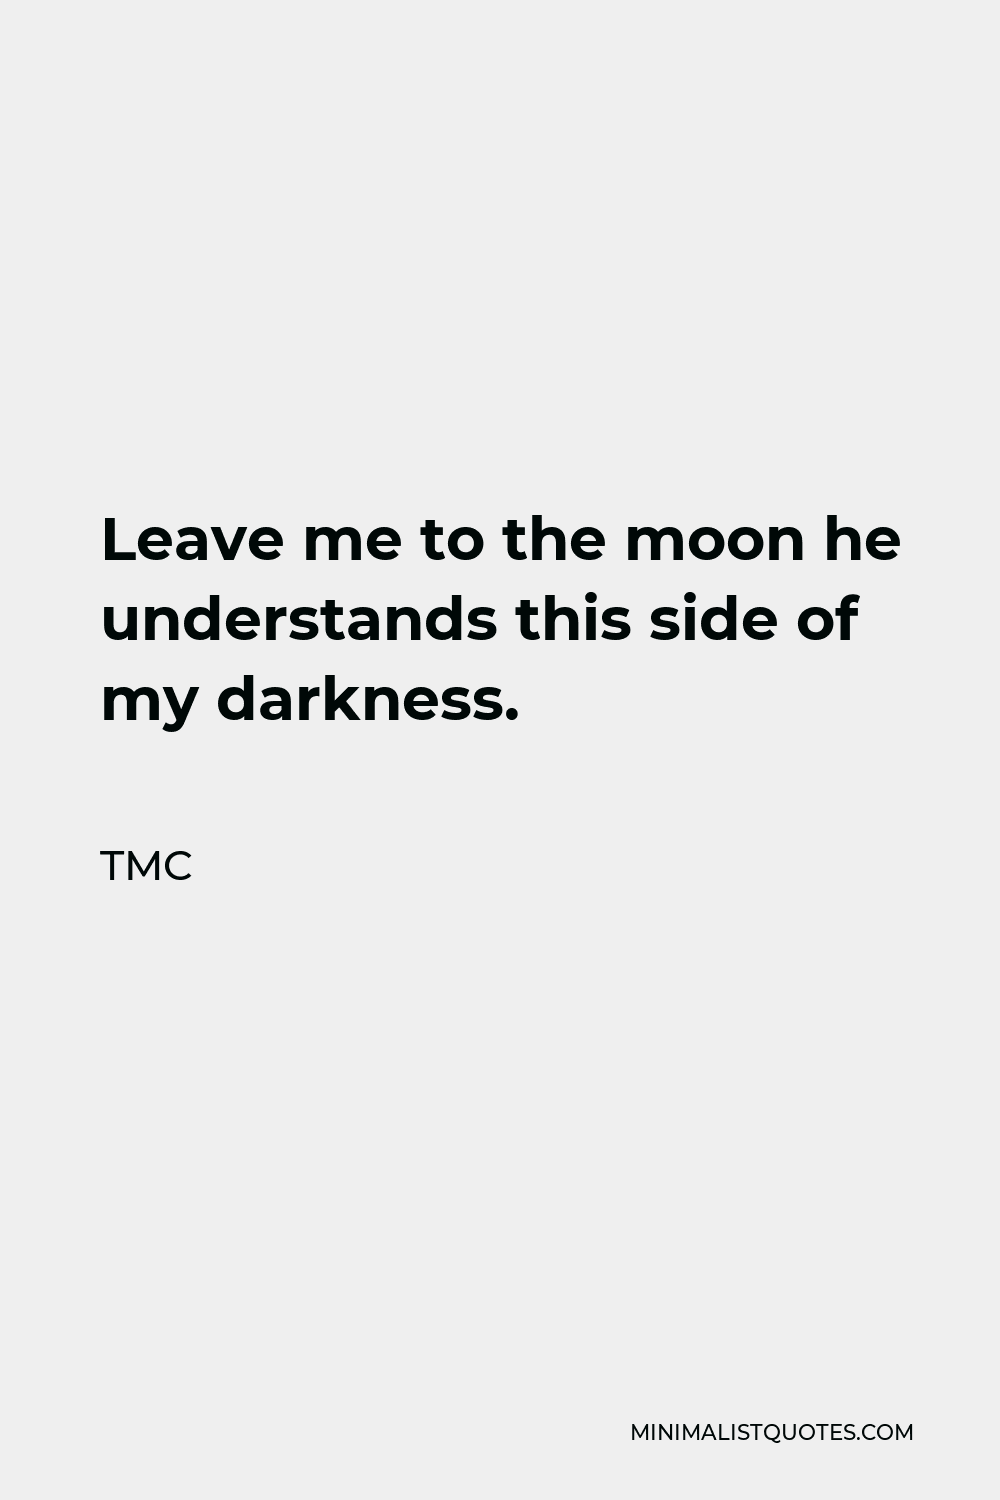 TMC Quote - Leave me to the moon he understands this side of my darkness.